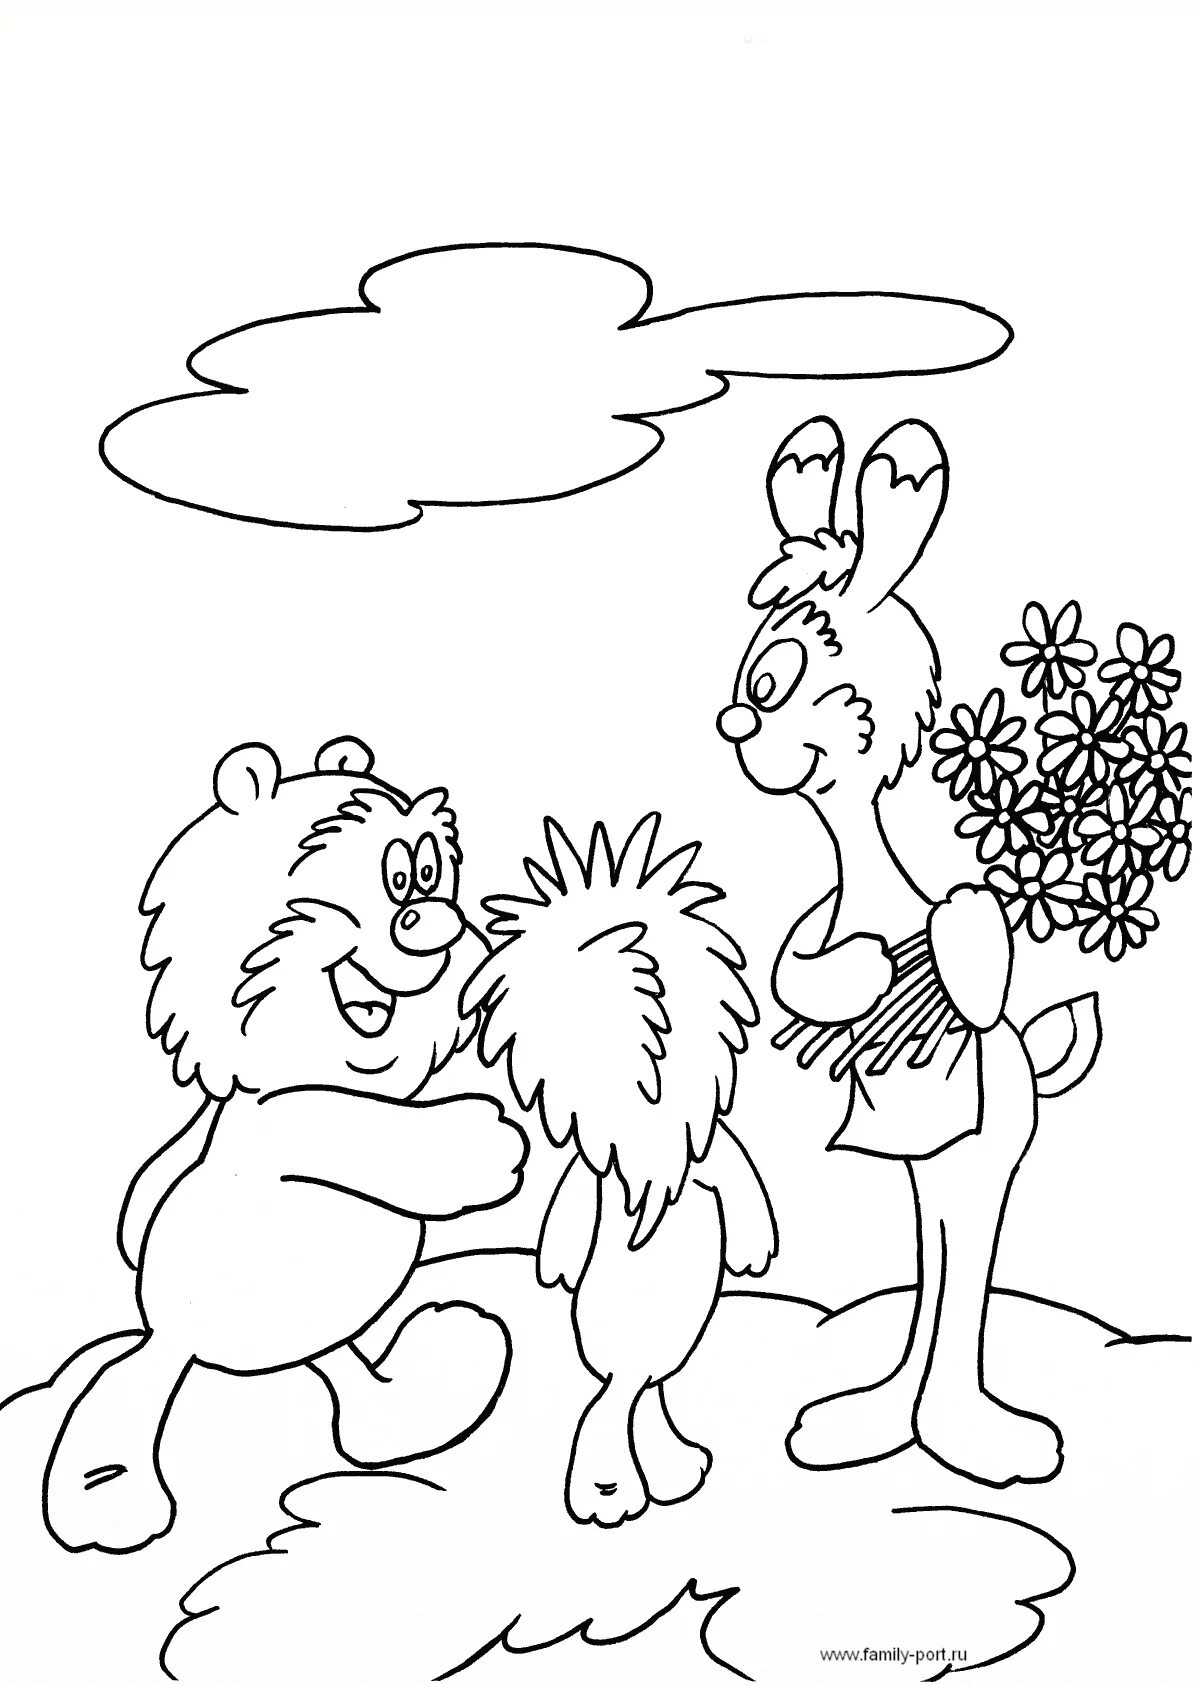 Shimmering hedgehog and teddy bear coloring pages